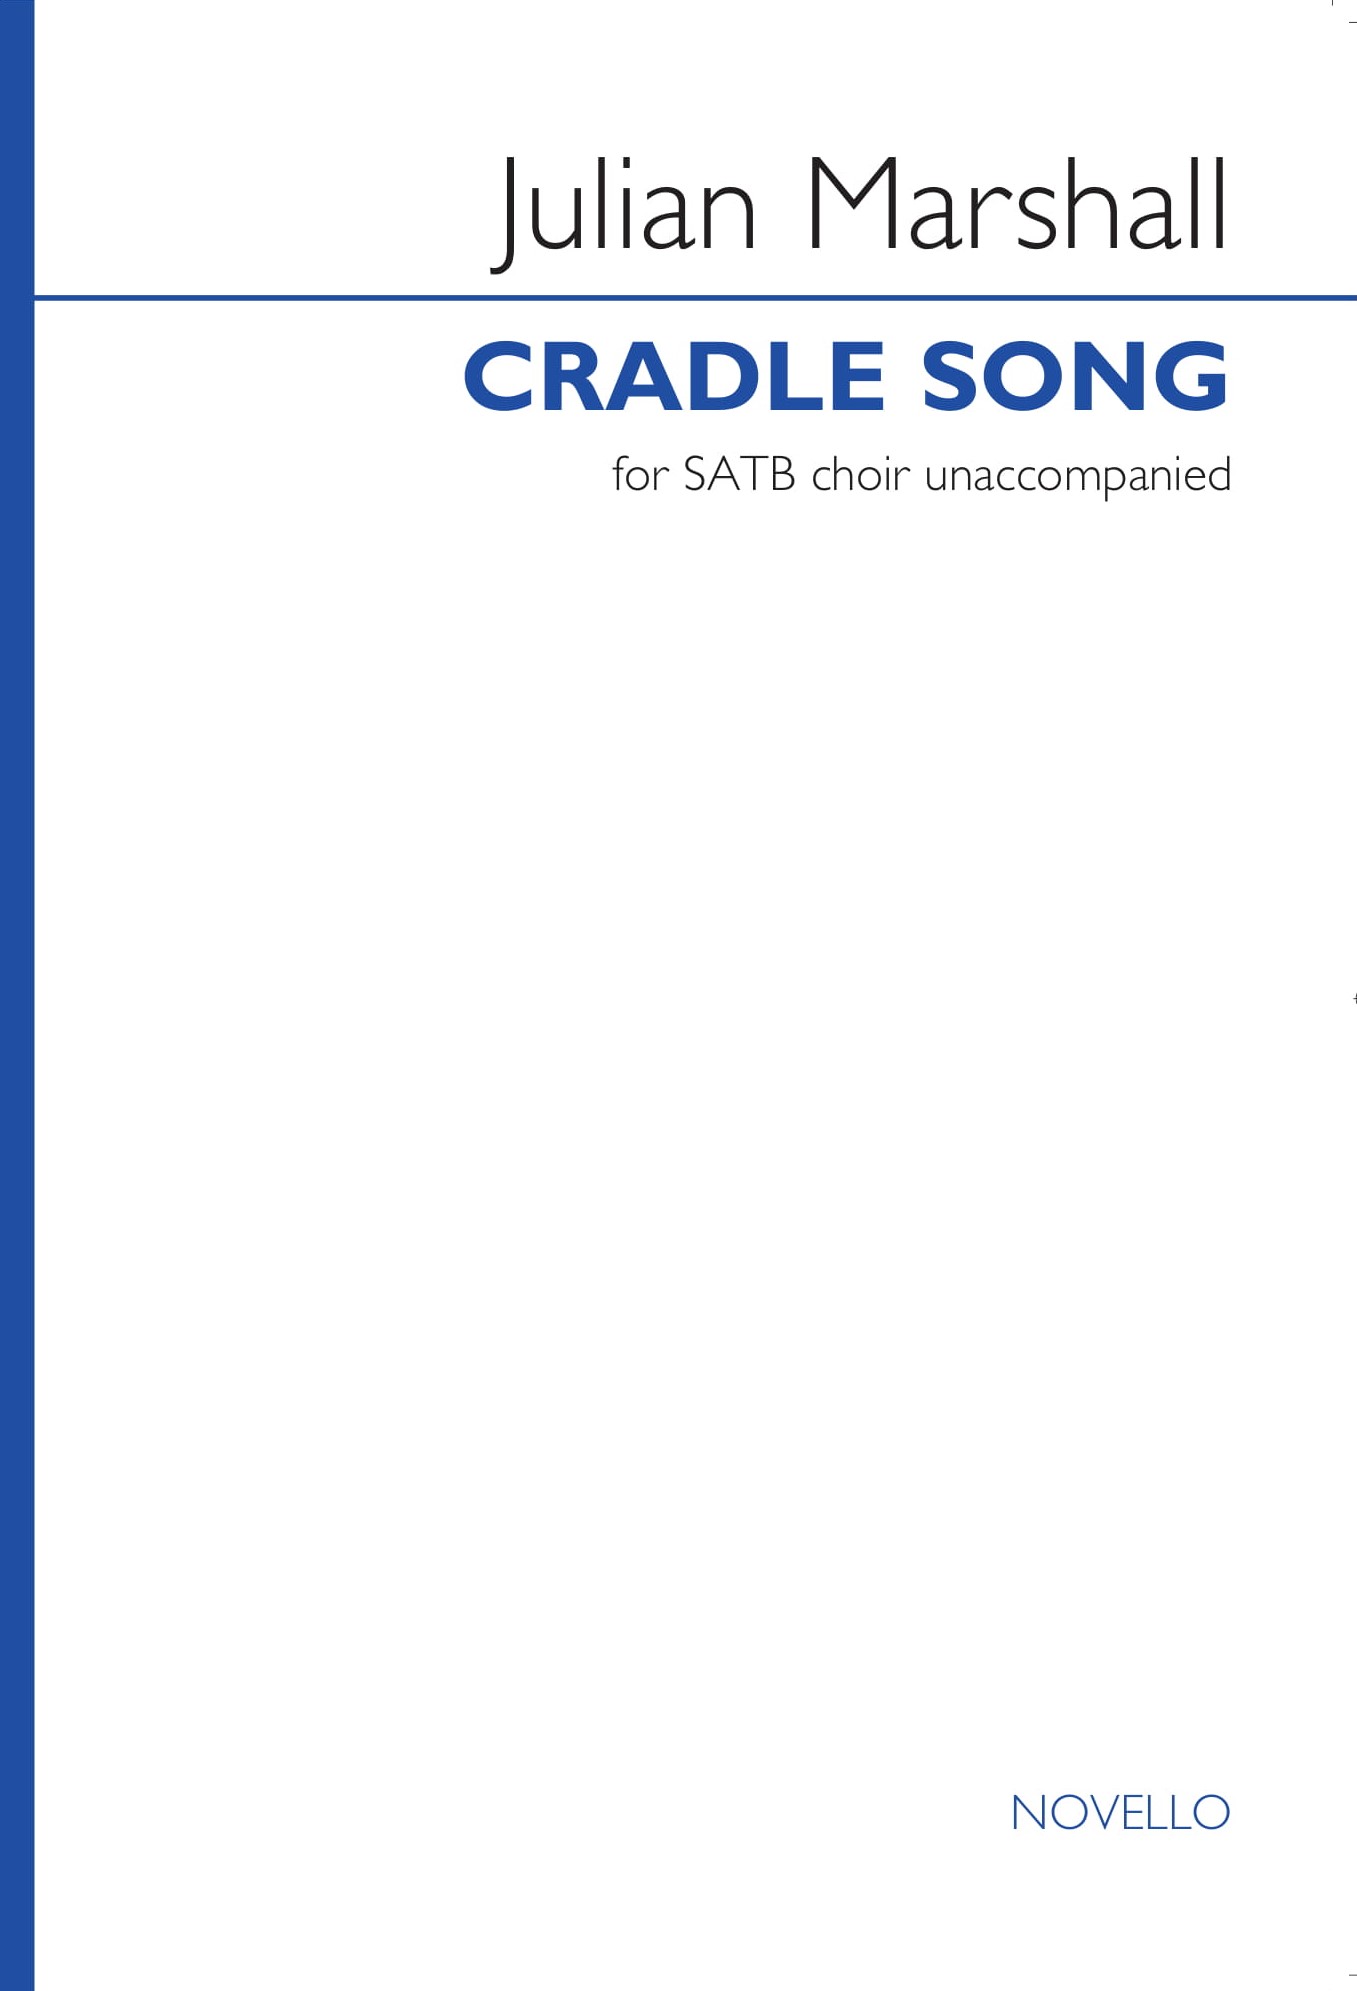 Julian Marshall: Cradle Song: SATB: Vocal Score